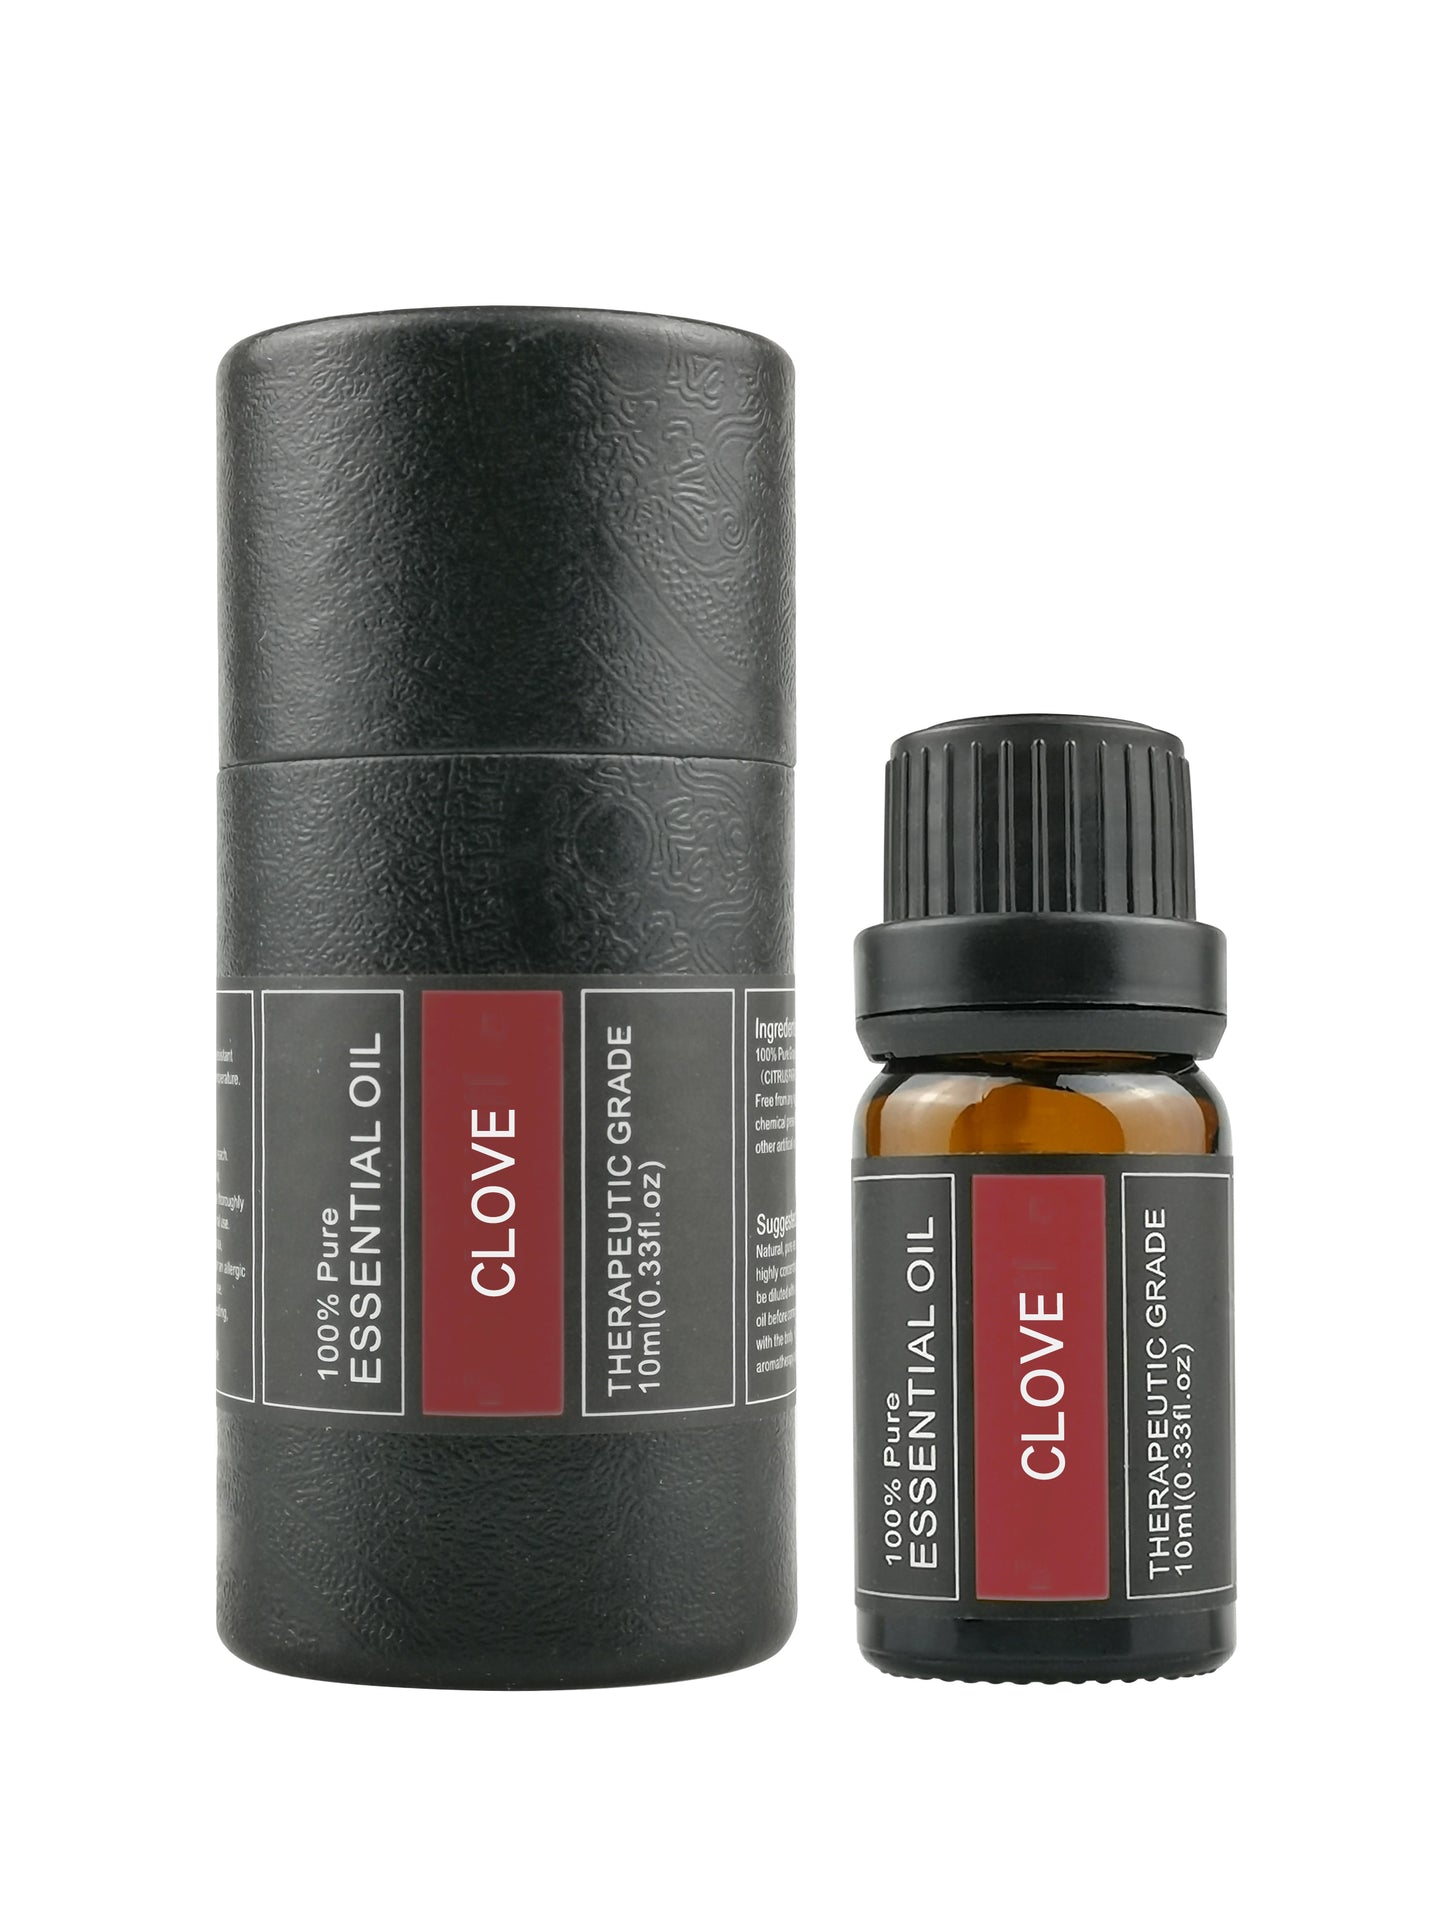 OEM & ODM Clove Single Aromatherapy Essential Oil, 100% Natural Essential Oil with Private Label 224